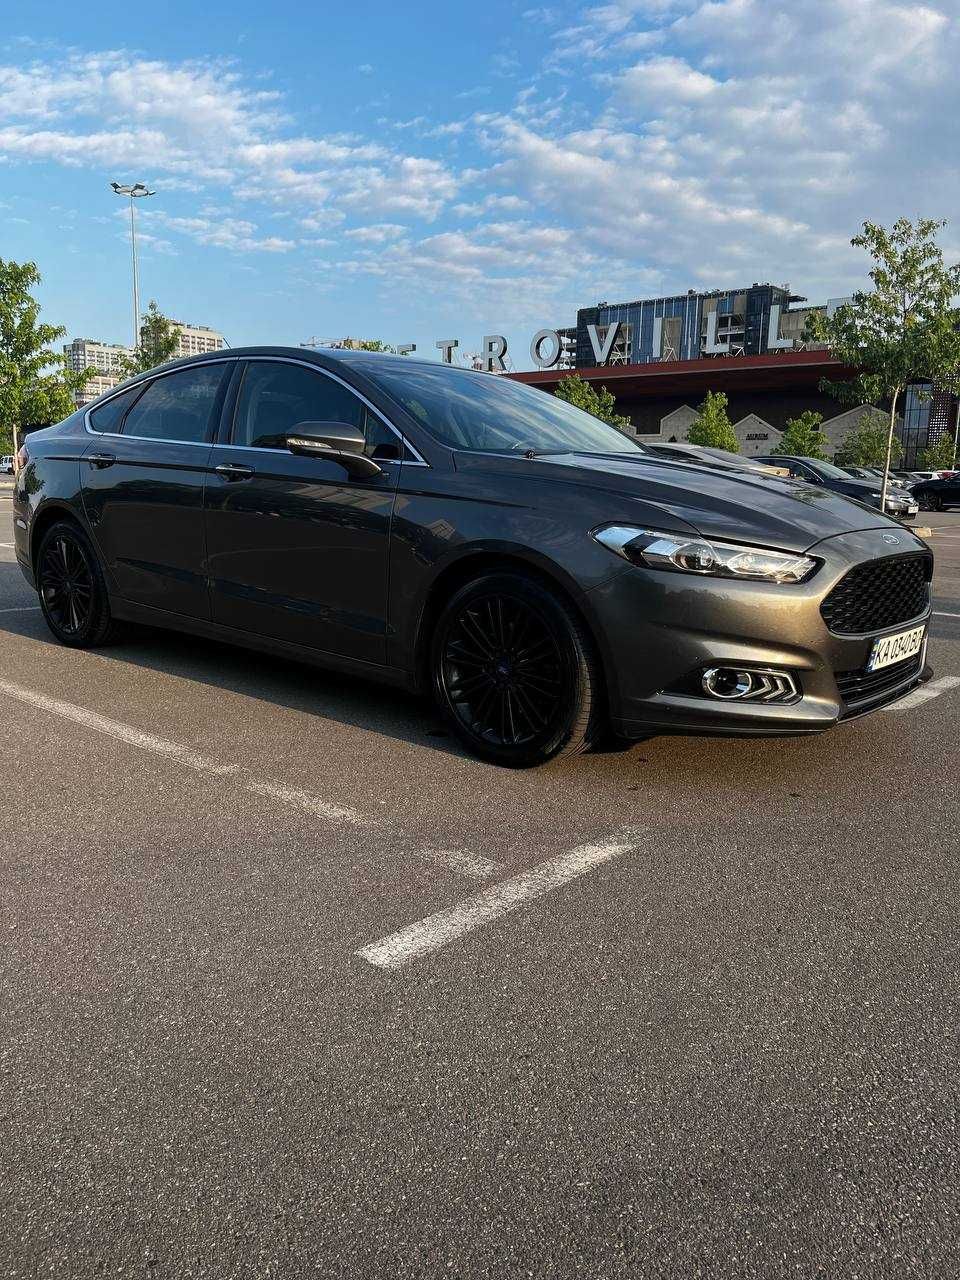 Ford Fusion 2.0 ecoboost